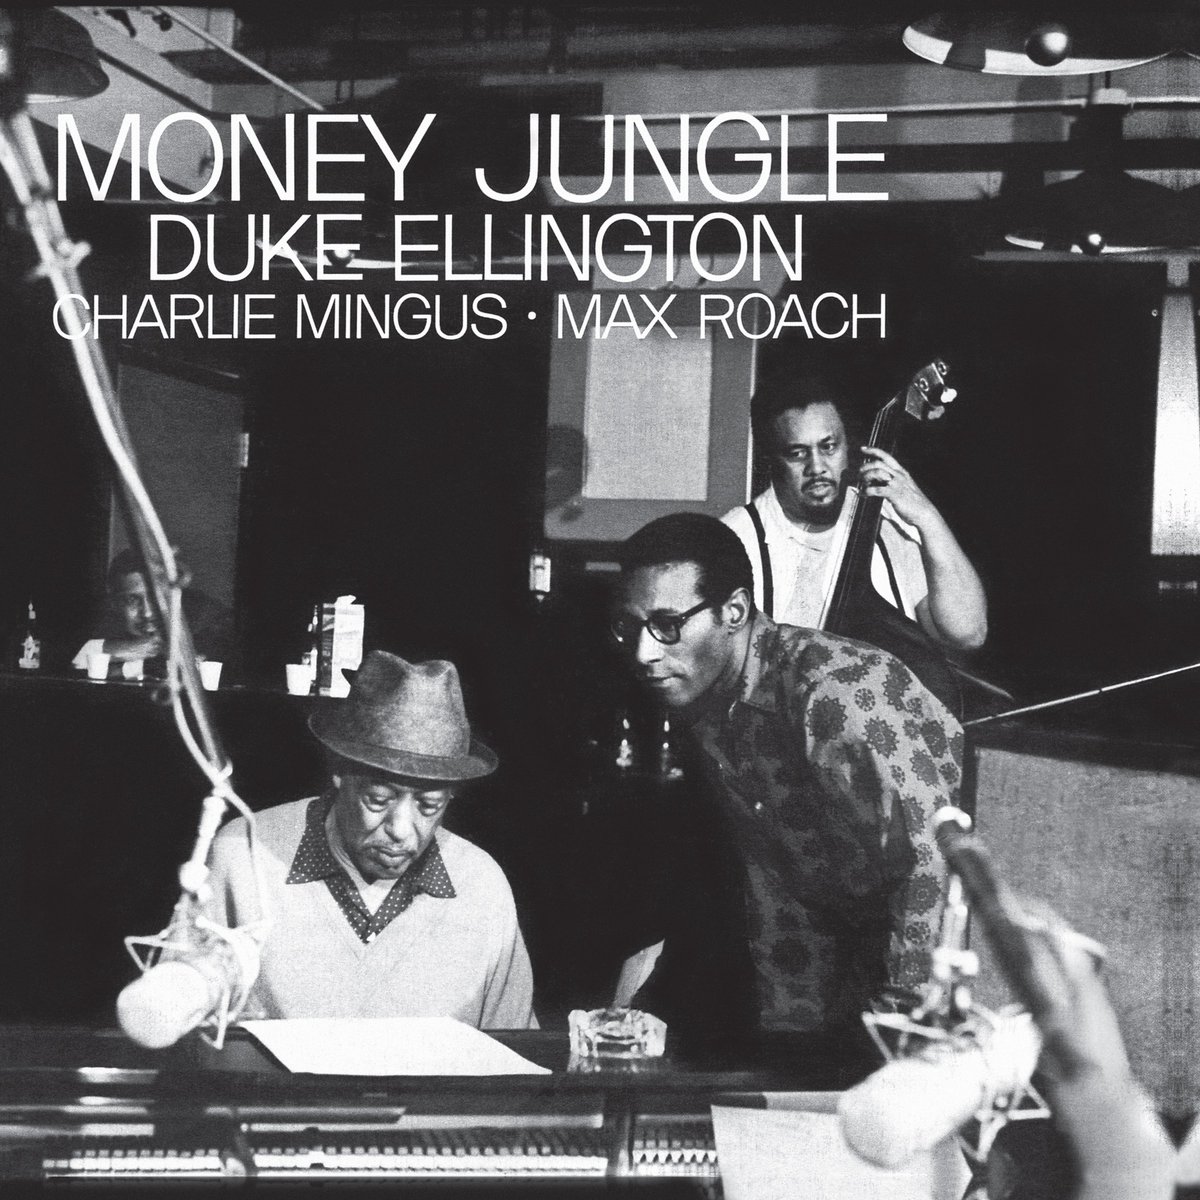 The great #DukeEllington was born on this day April 29, 1899. In 1962, Duke joined with 2 other masters—Charles Mingus & Max Roach—to record his classic album 'Money Jungle.' Listen or get the Tone Poet Vinyl Edition: bluenote.lnk.to/DukeEllington-…